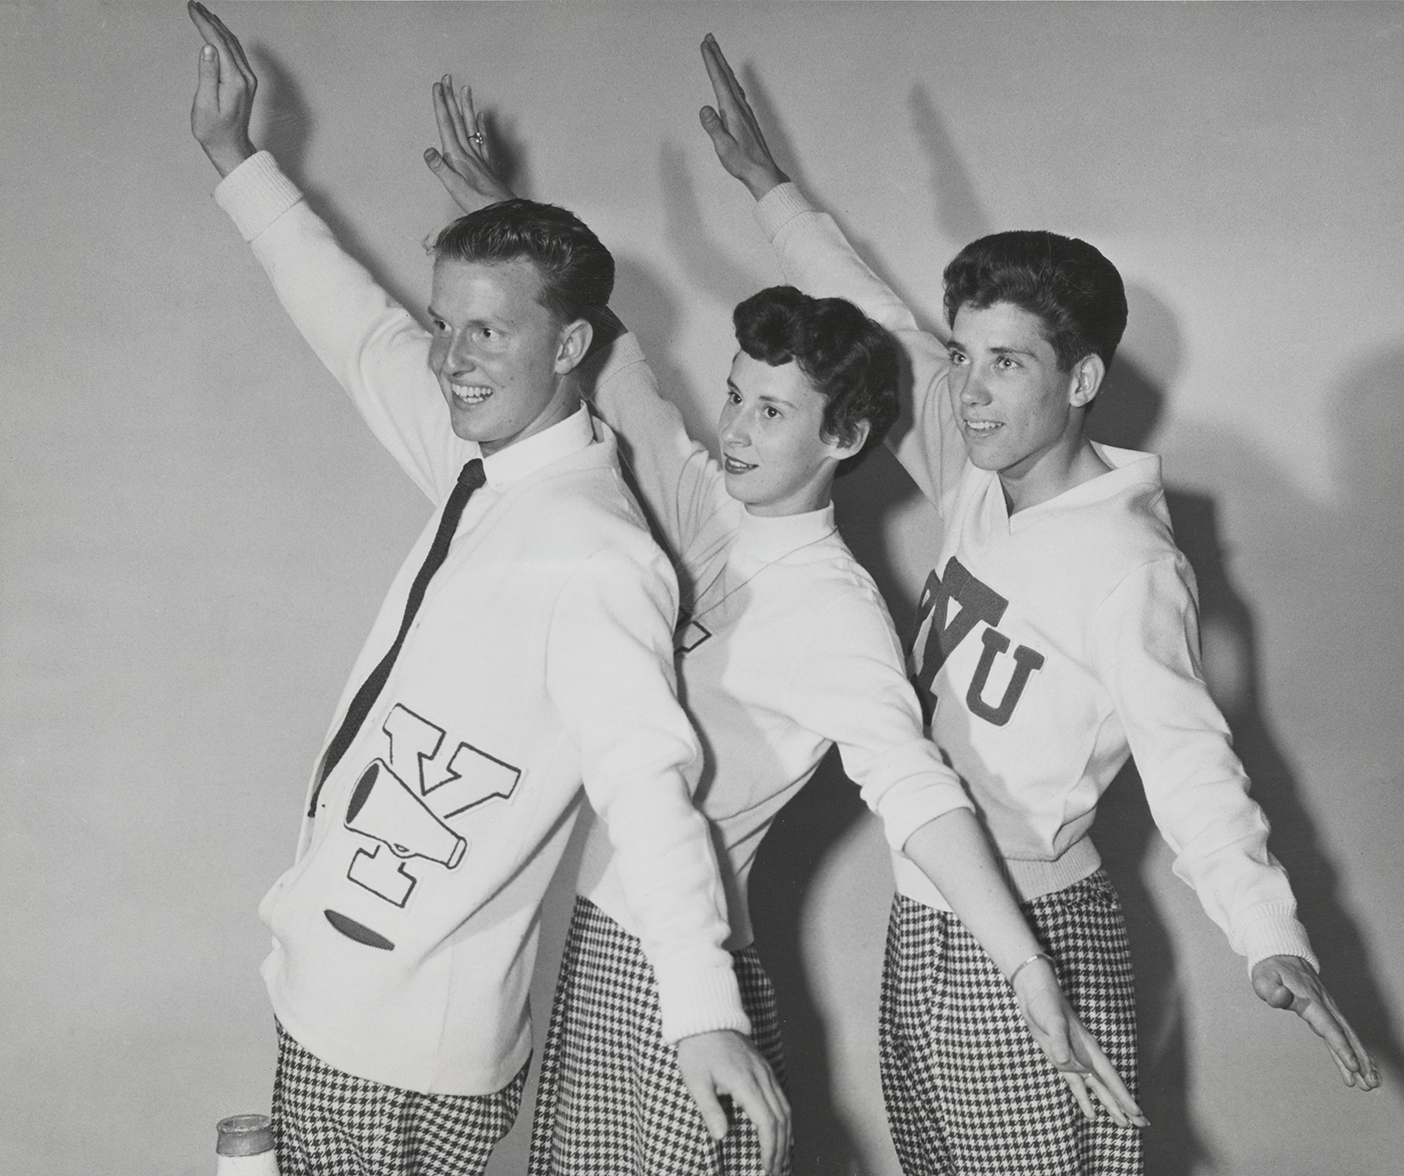 A black and white photo of three cheerleaders from 1954 raising their arms.